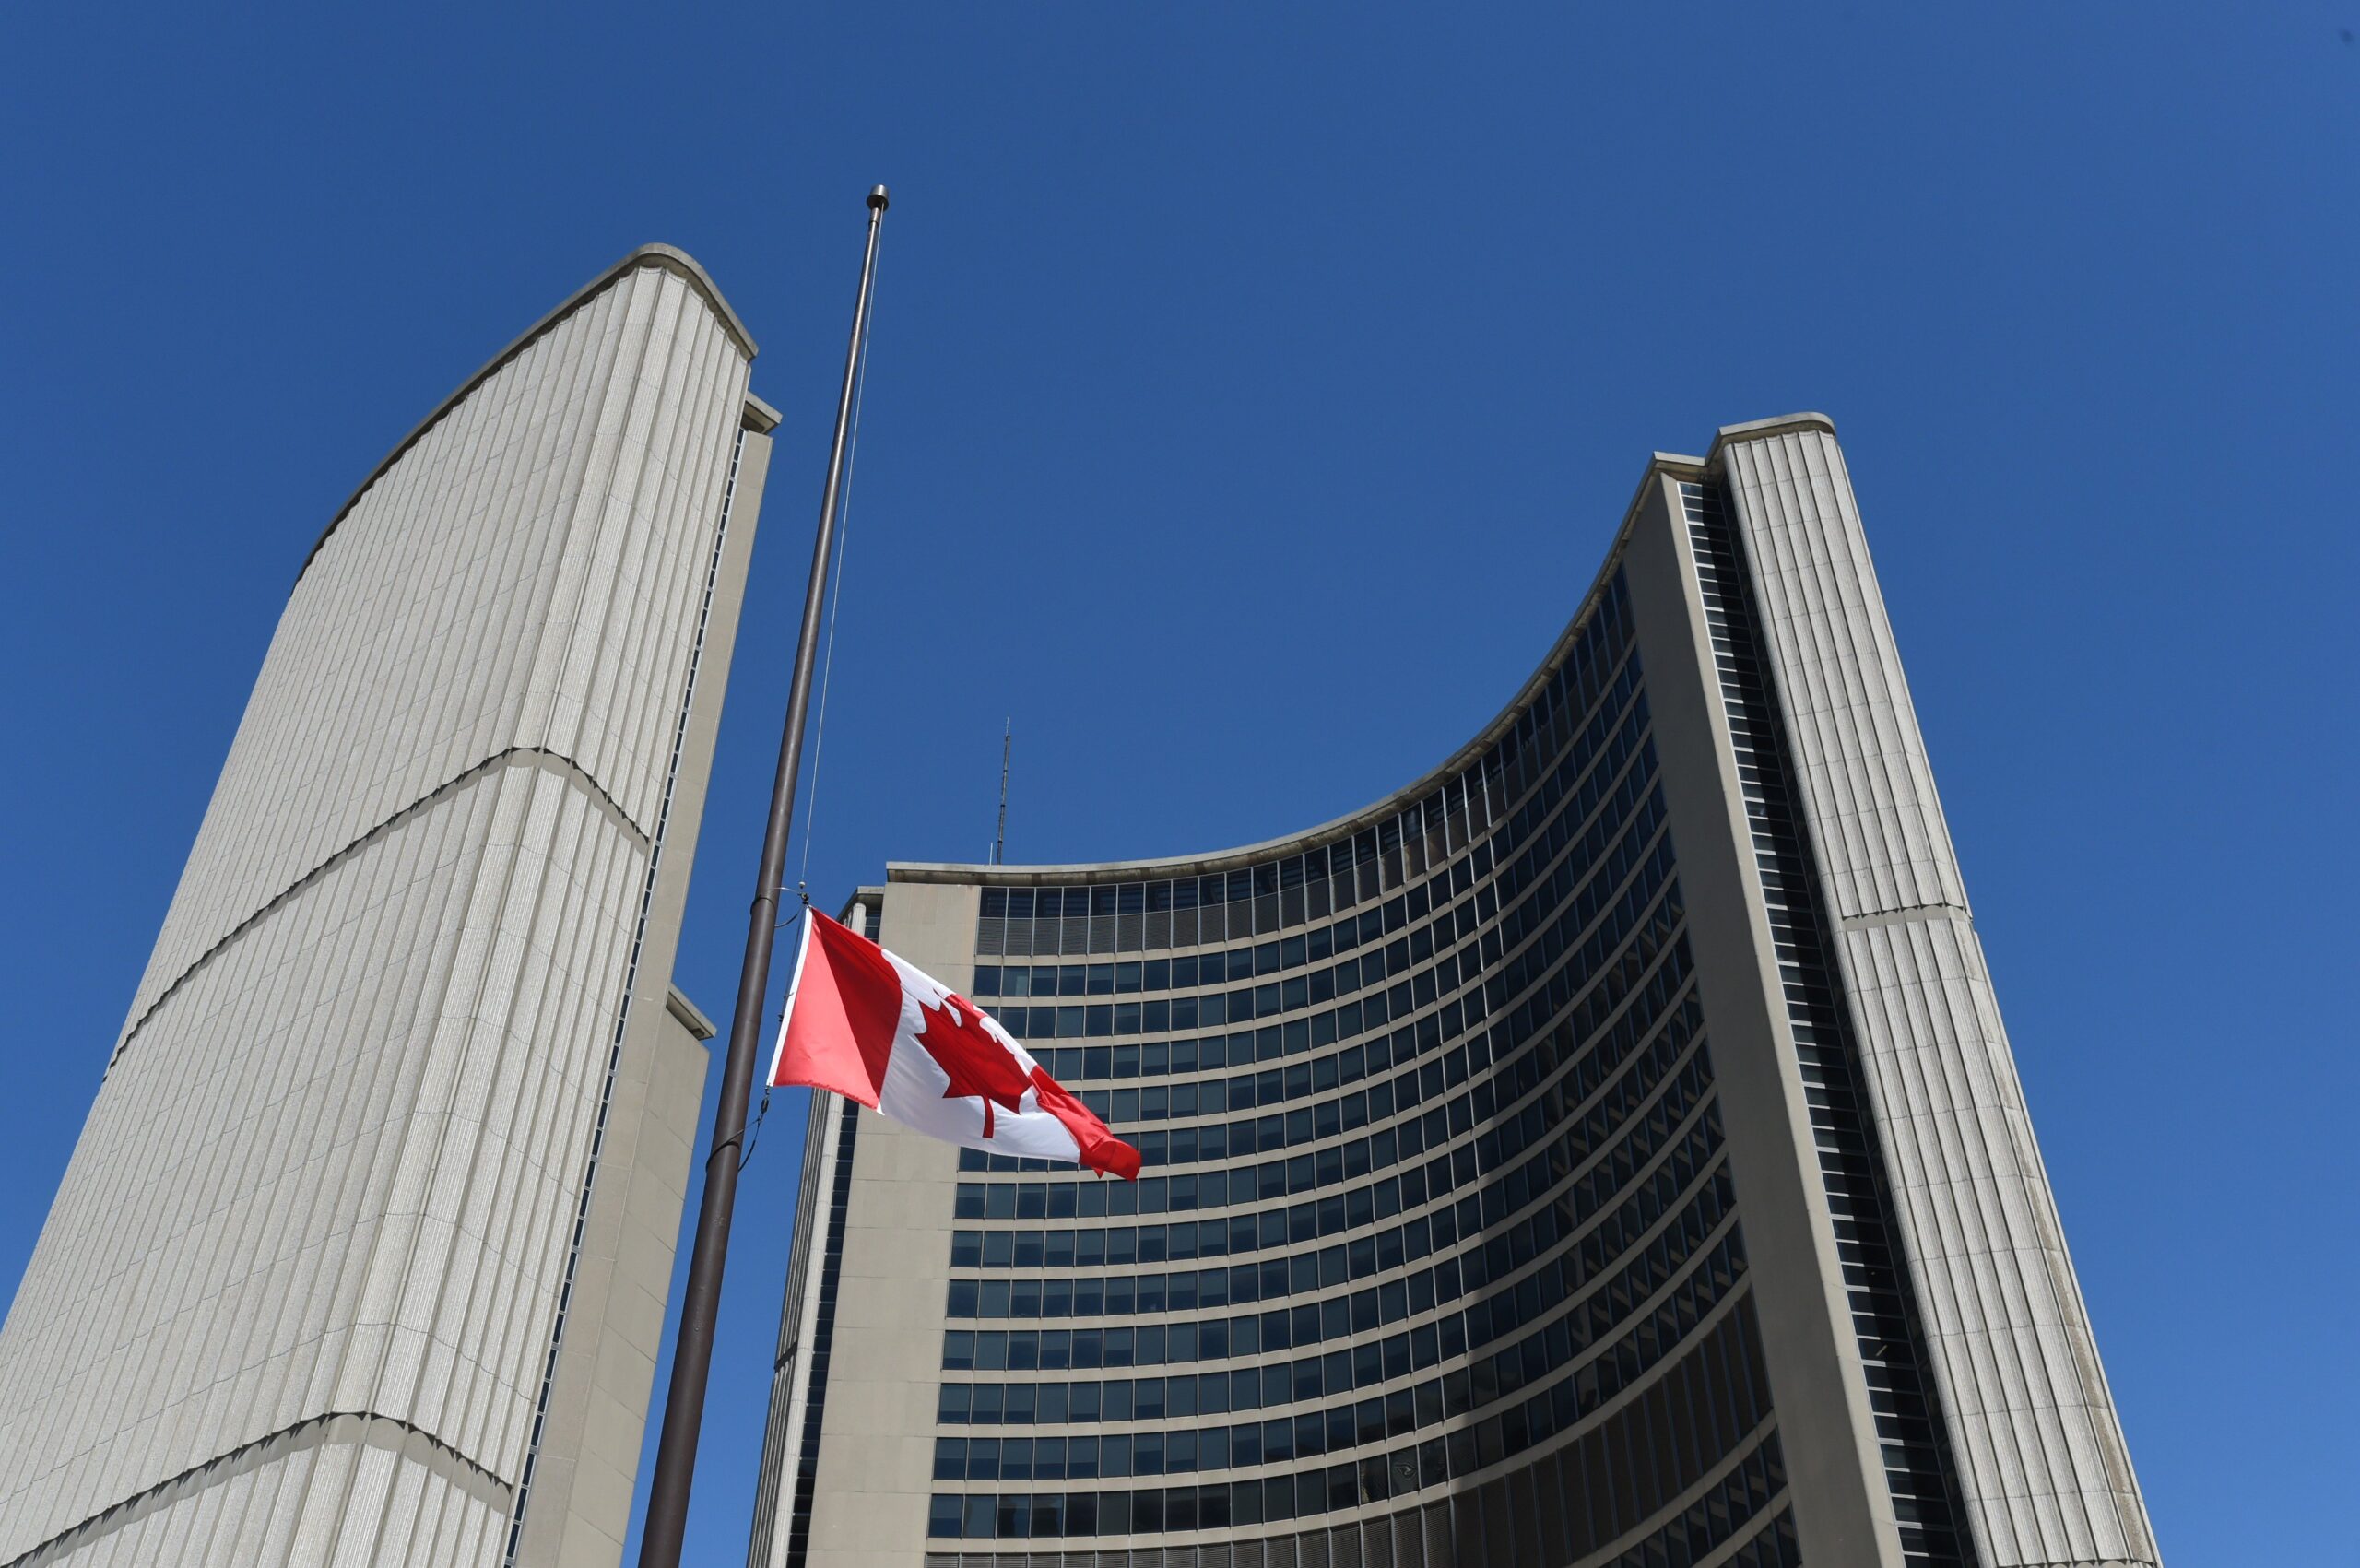 Today, flags at City Hall, Old City Hall and in Parks and at Monuments which memorialize the First World War are flying at half-mast to mark the National Day of Remembrance of the Battle of Vimy Ridge.